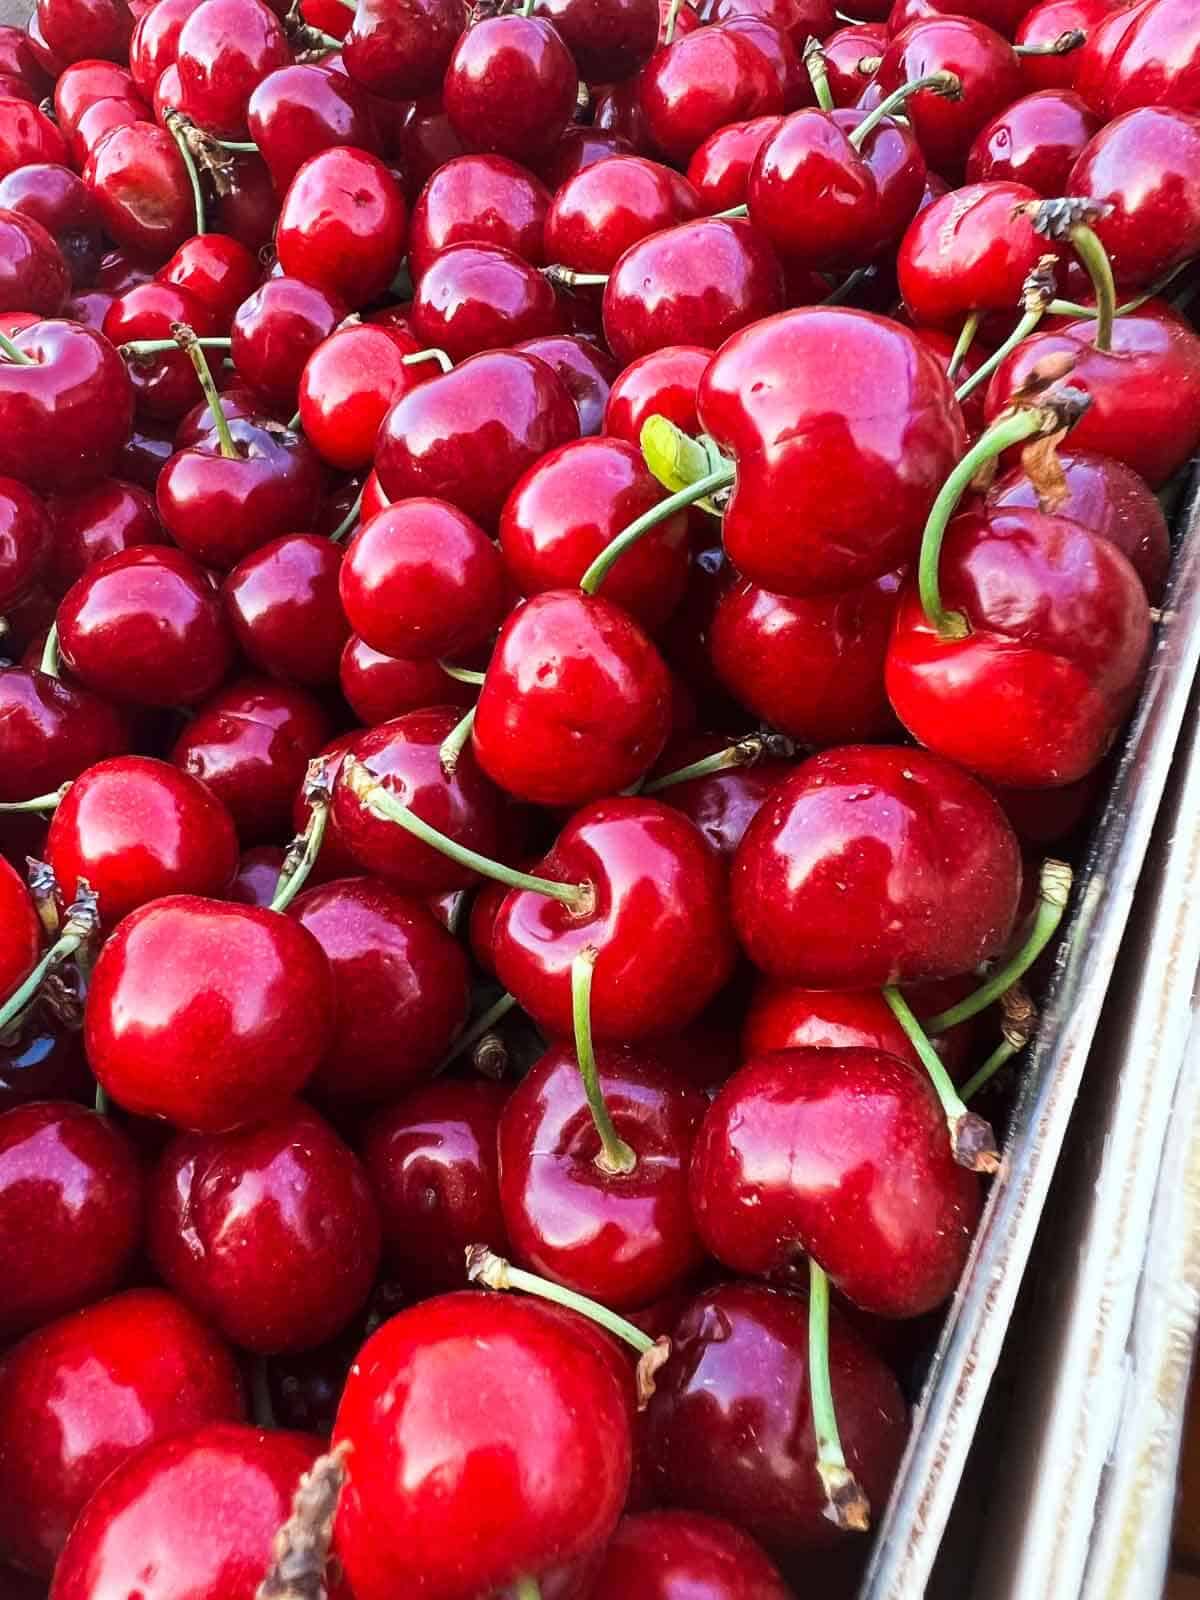 cherries in a box in the farmers market.